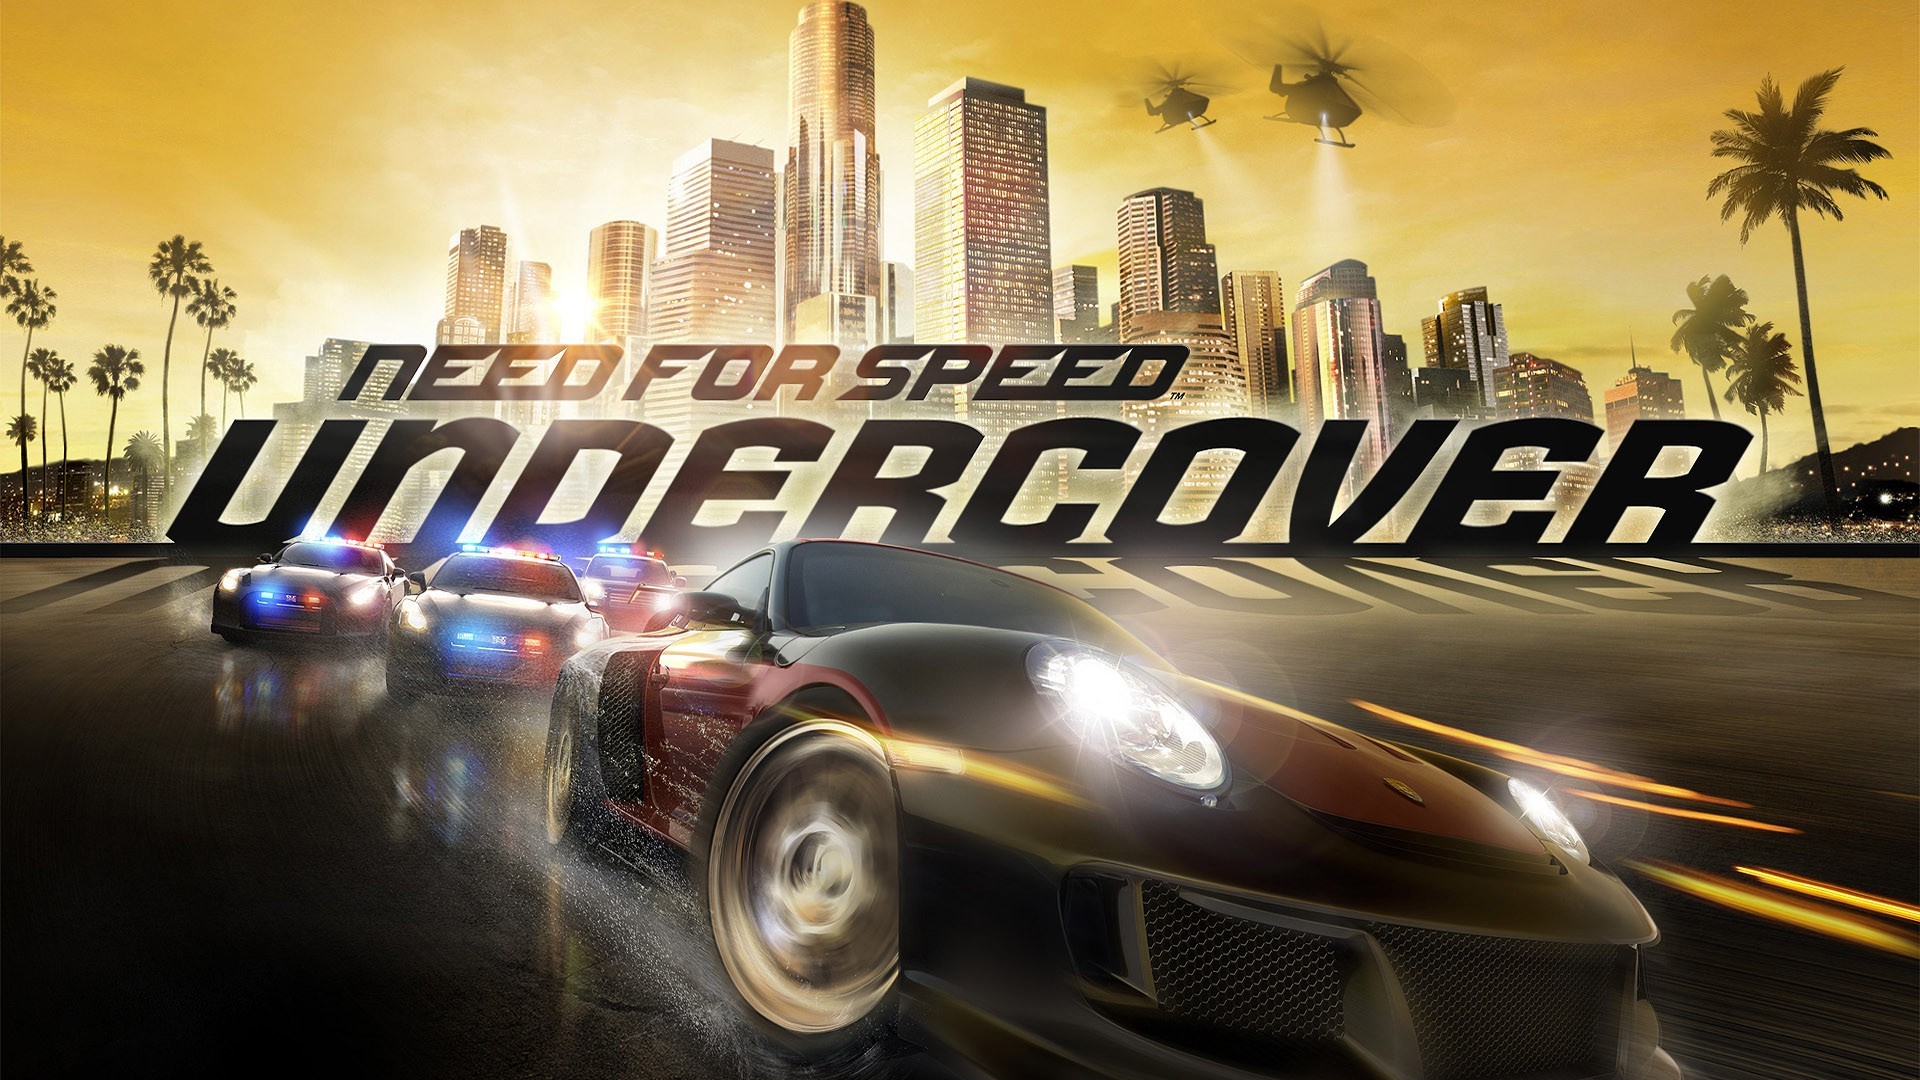 General 1920x1080 video games video game art racing need for speed: Undercover car vehicle police cars